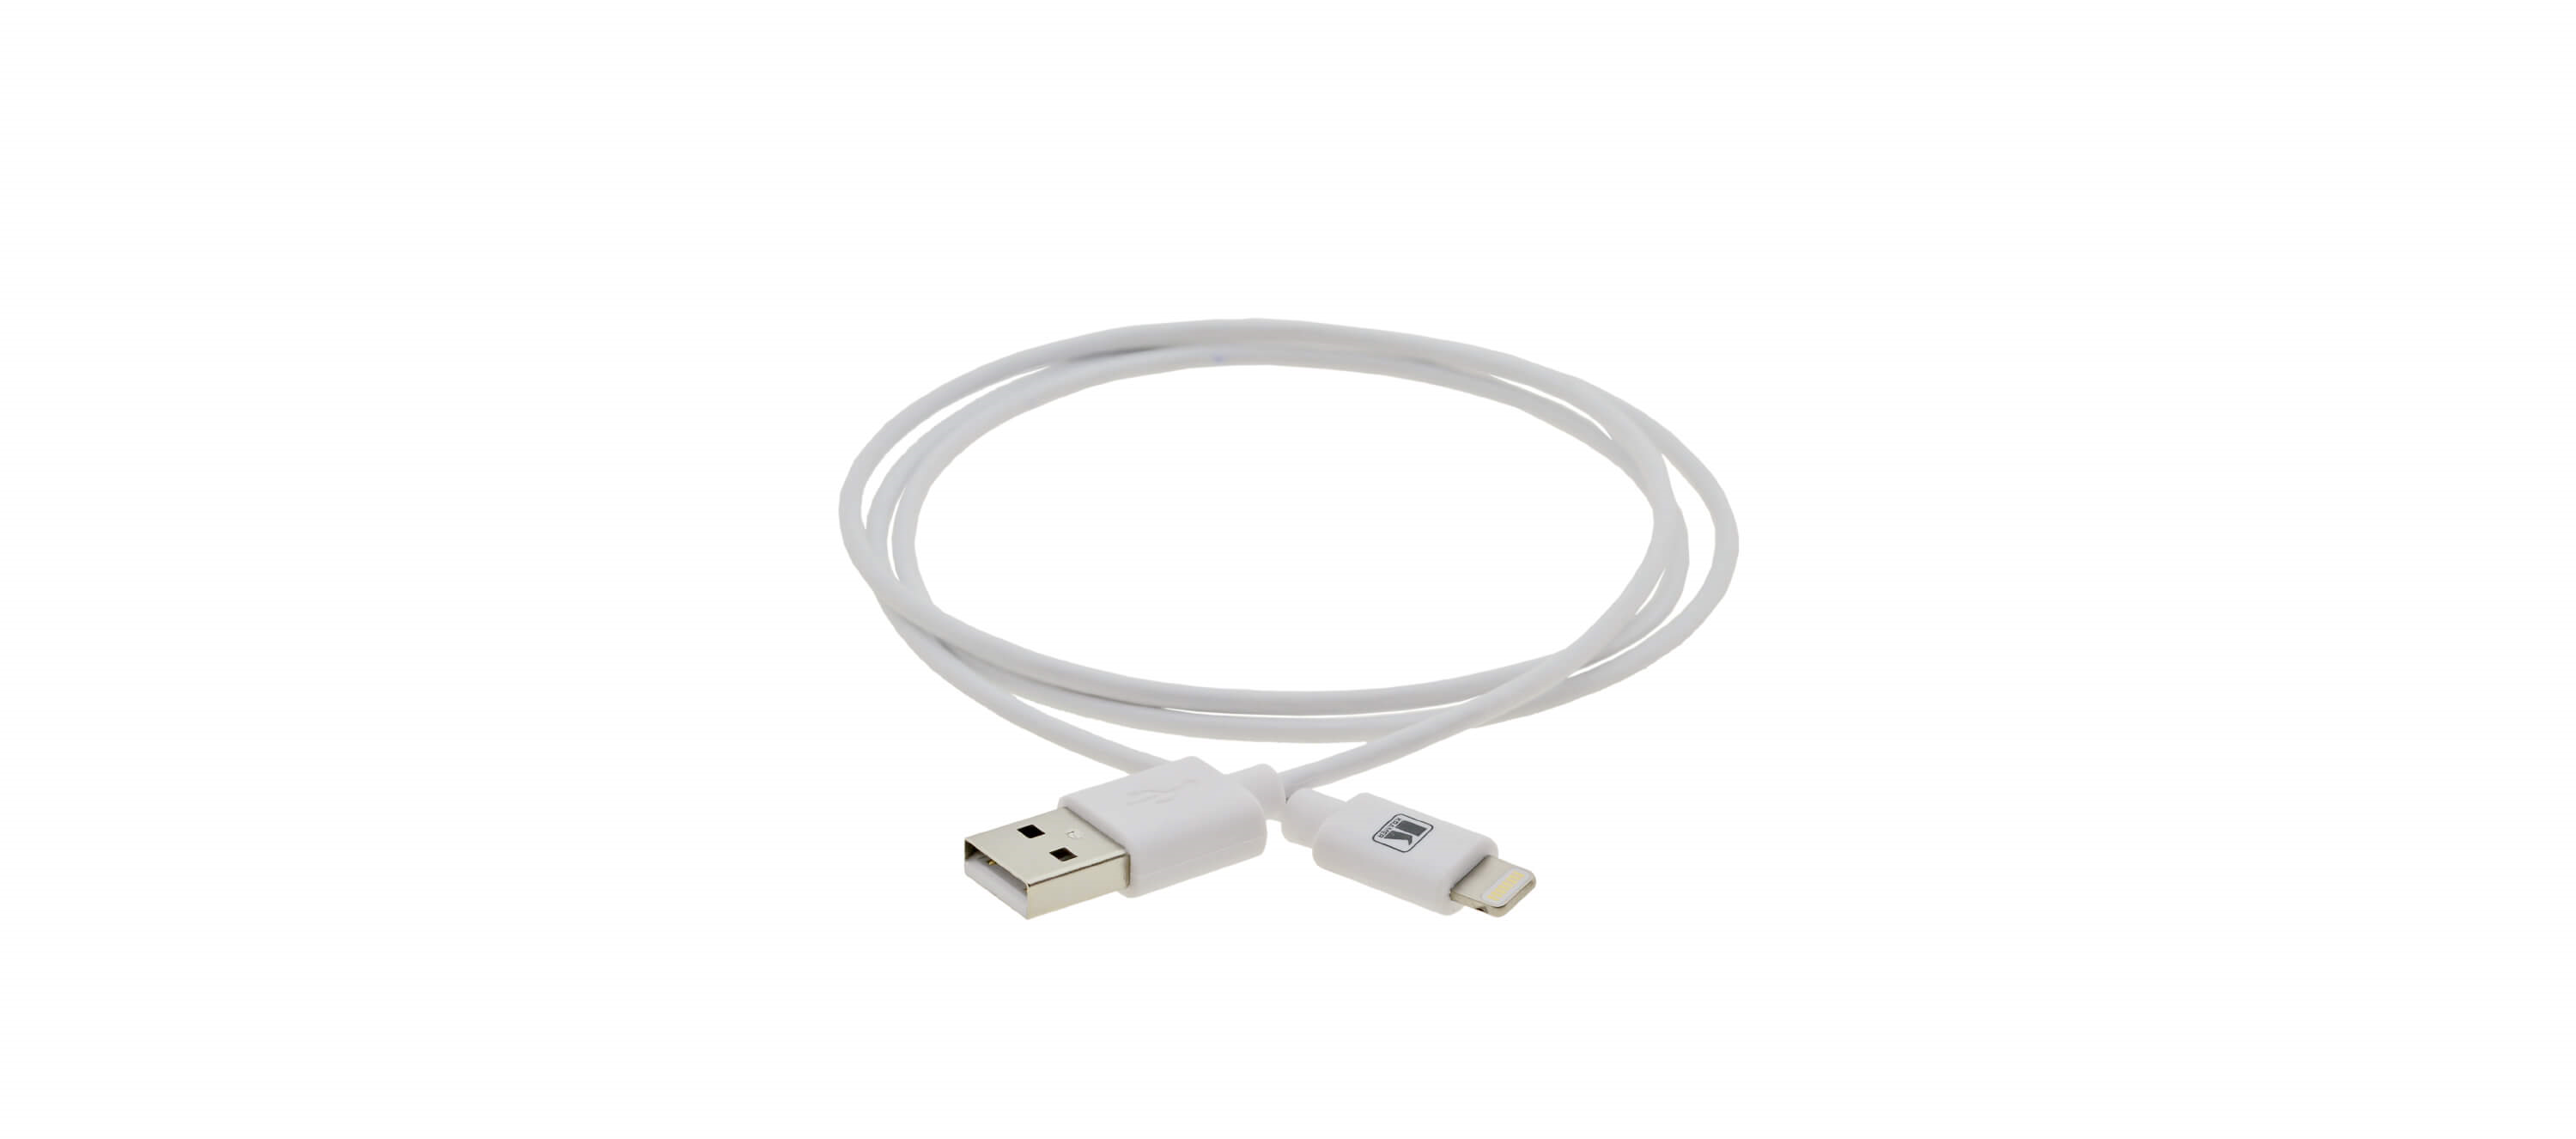 C-UA/LTN/WH-3 Apple Certified Lightning to USB Sync & Charge Cable